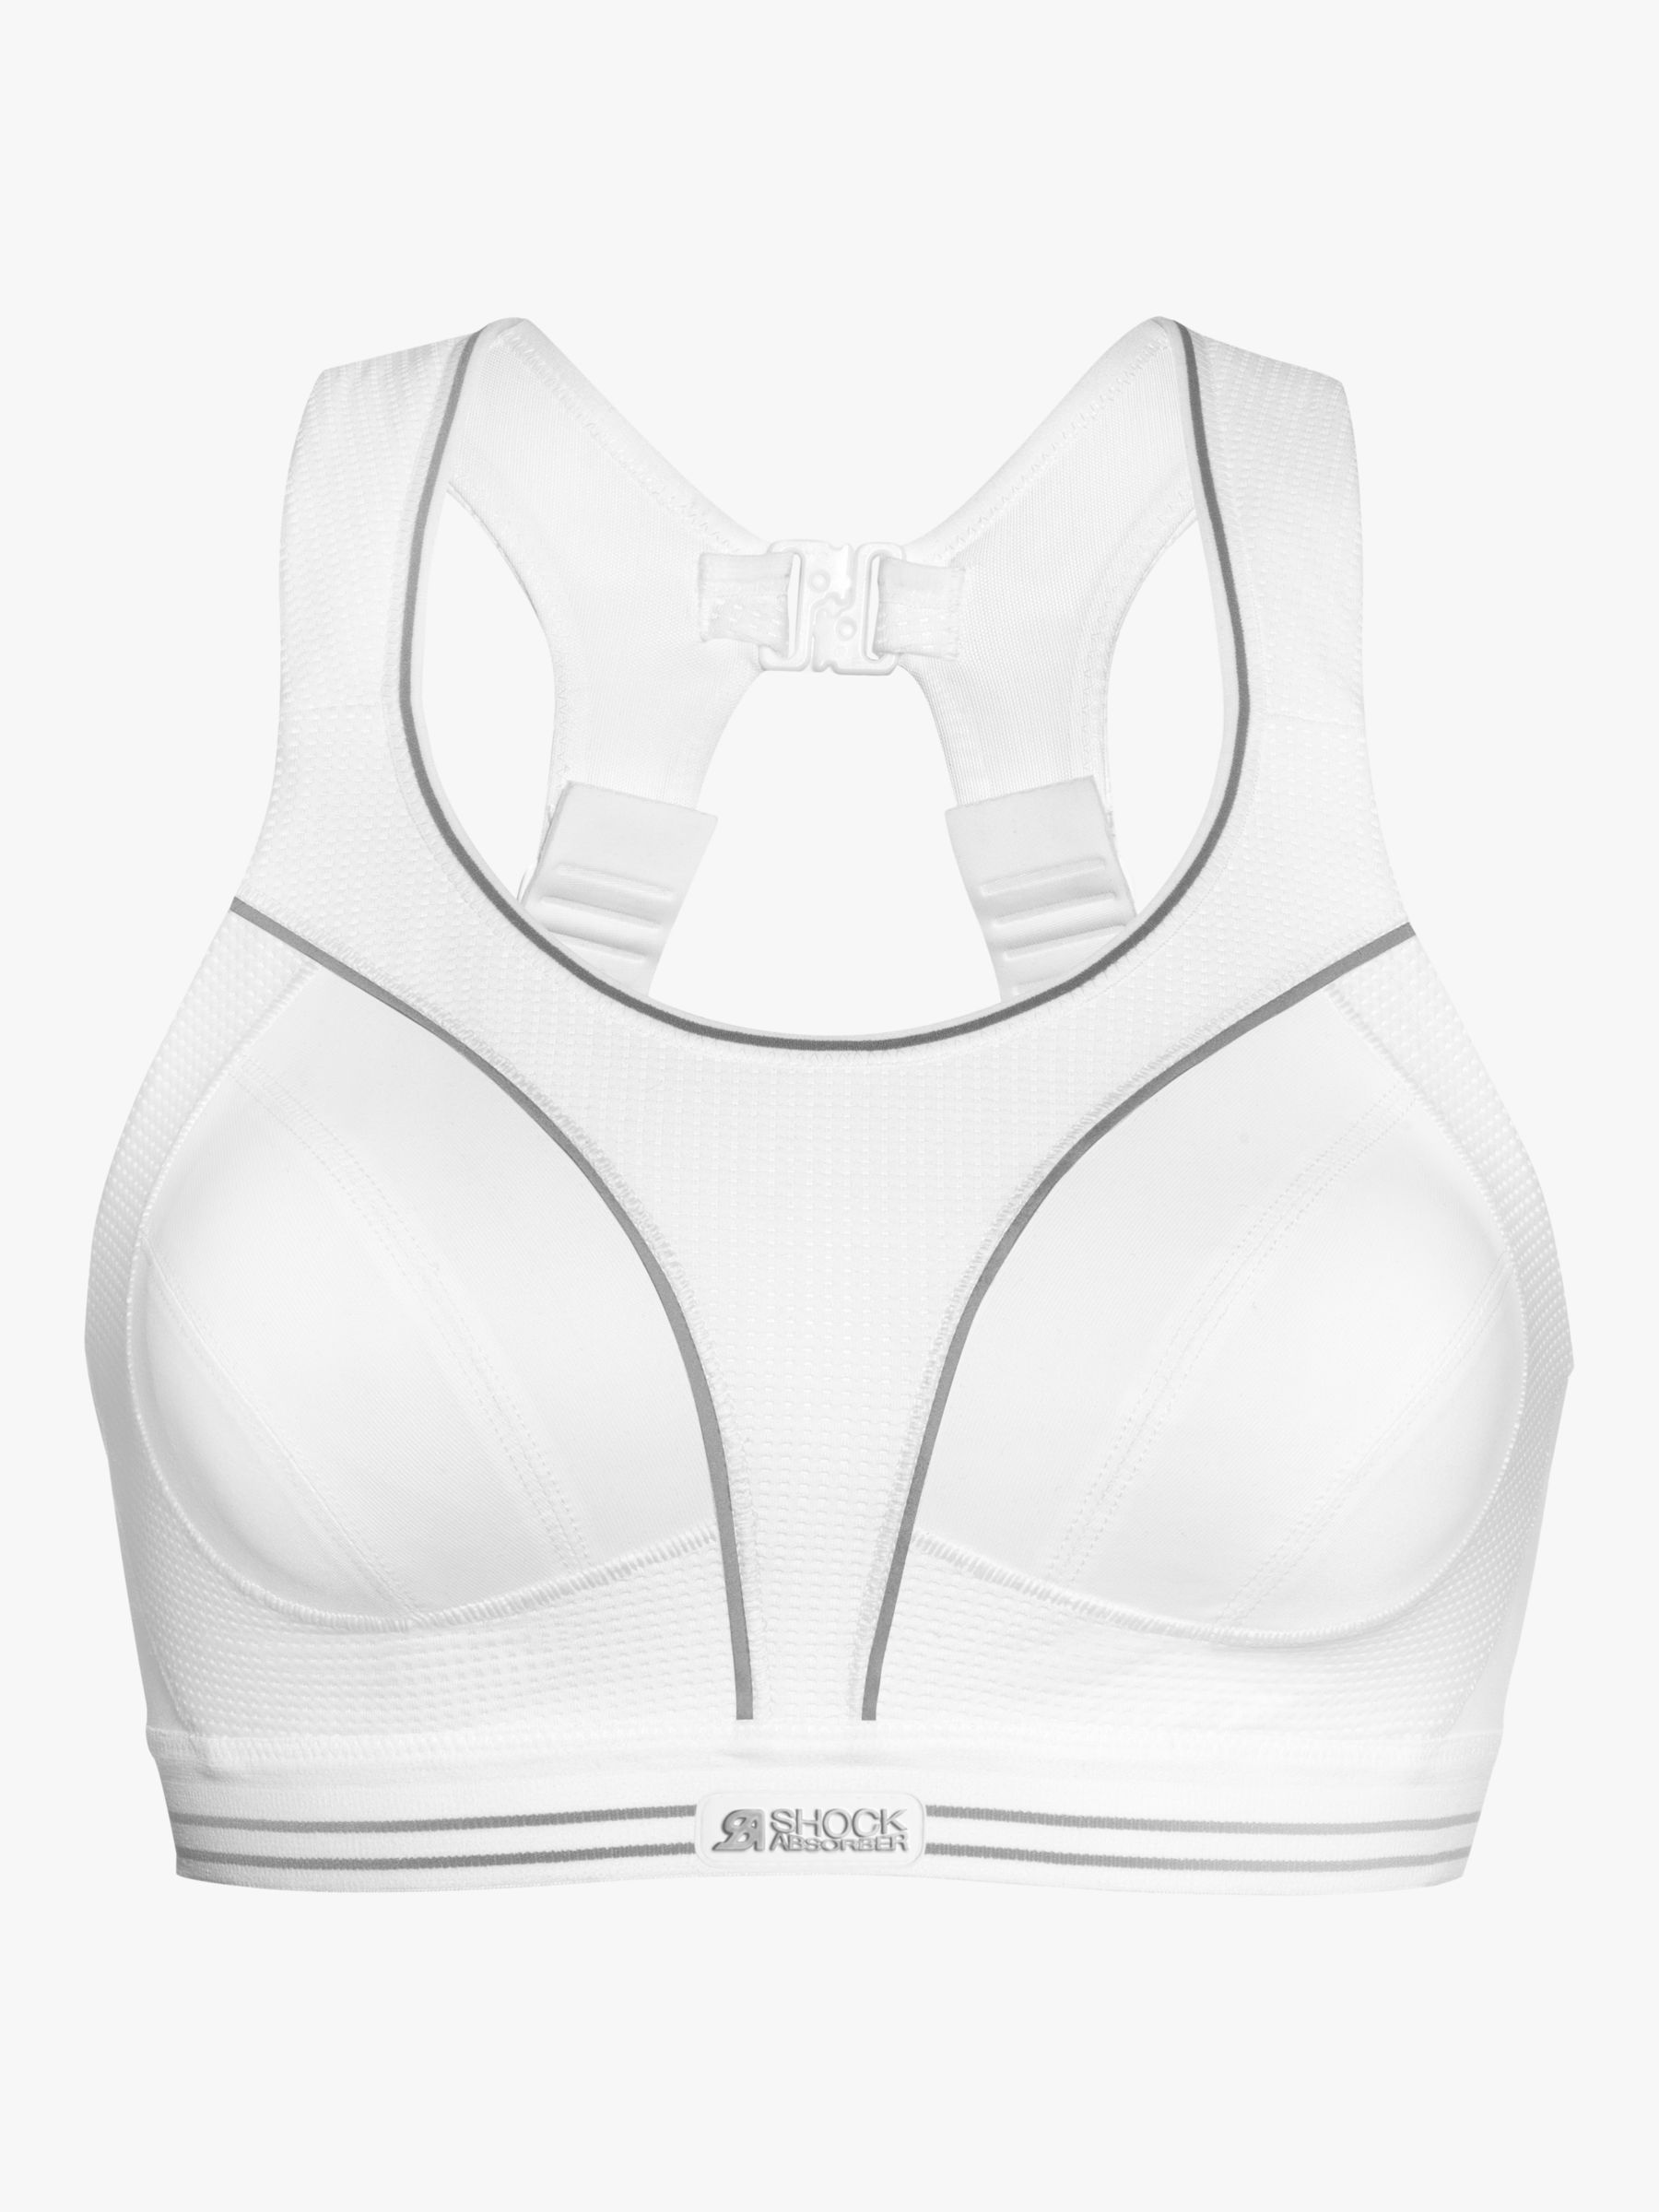 NEW + TAGS * SHOCK ABSORBER * WHITE EXTREME SUPPORT SPORTS BRA SIZE 28DD  RRP £28